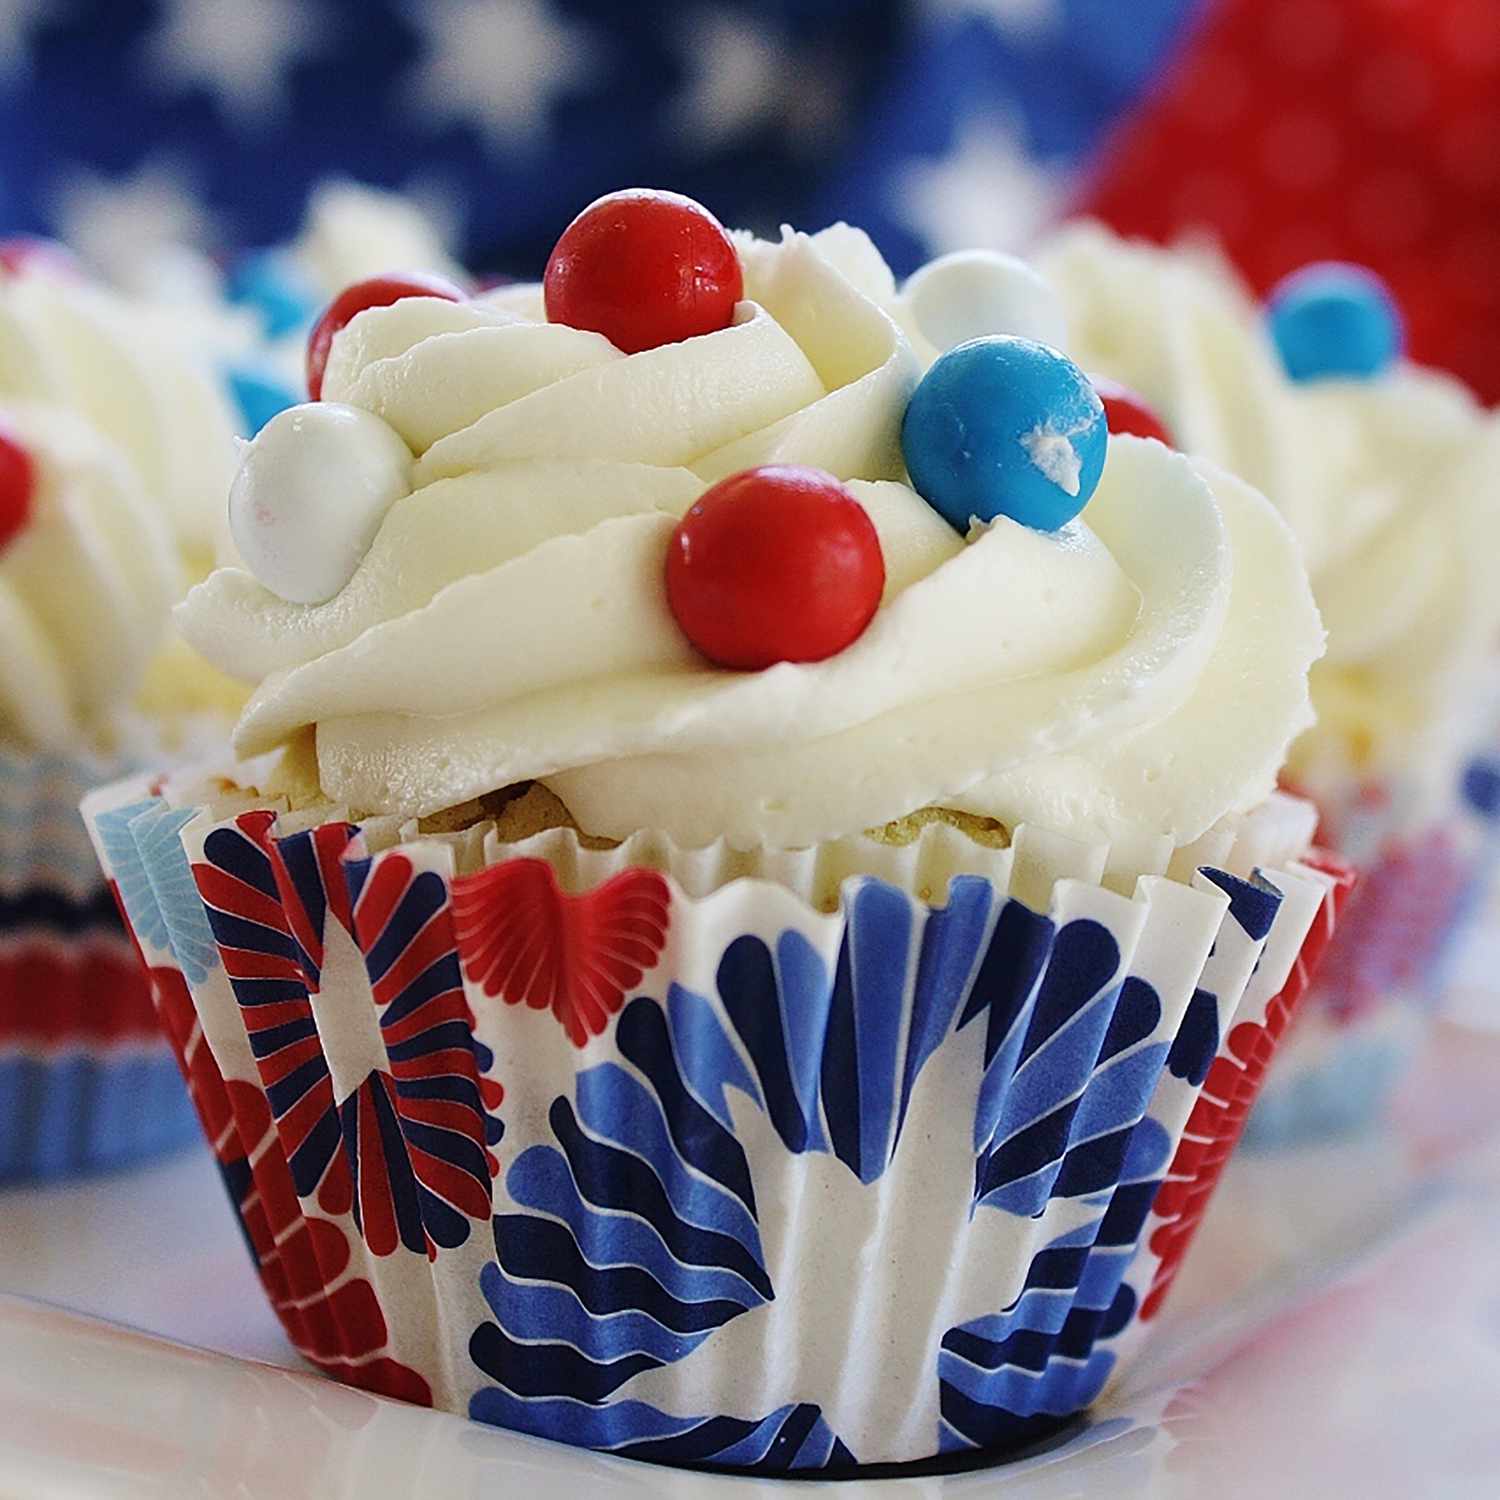 Close up of a white frosted cupcake decorated with red and blue candies for the 4th of July